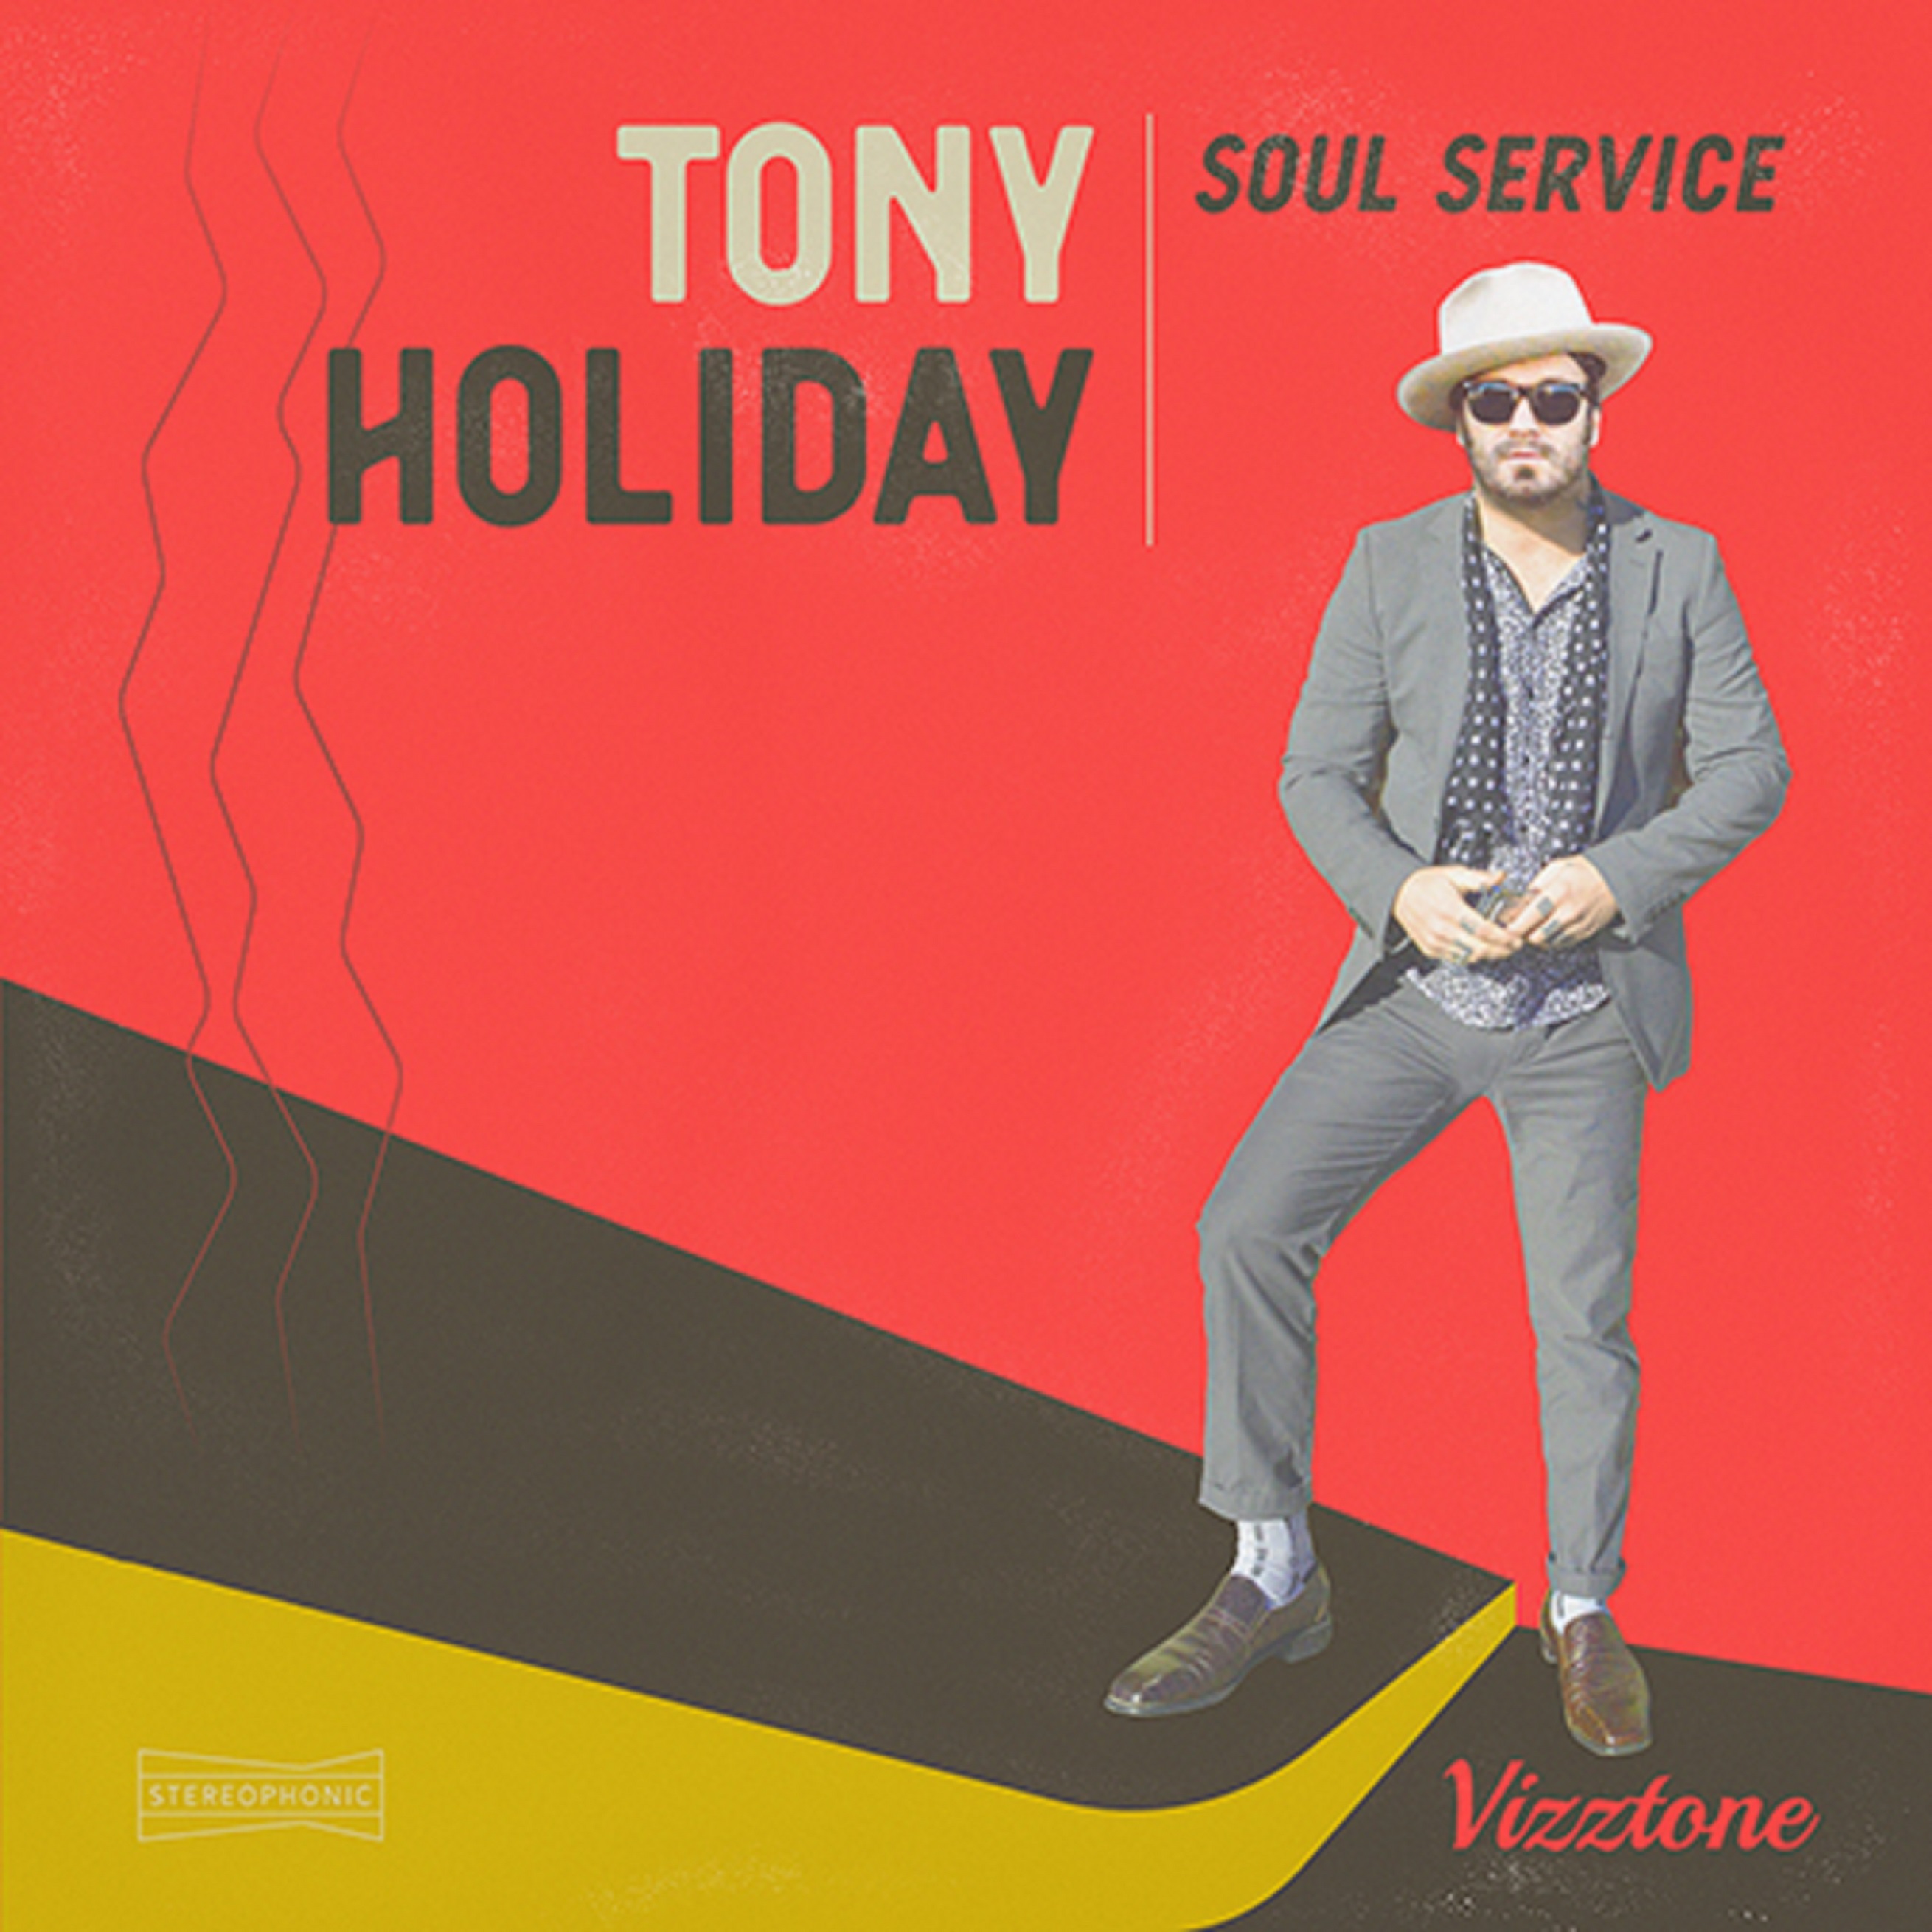 Tony Holiday Serves up Some Memphis Soul with New VizzTone Release